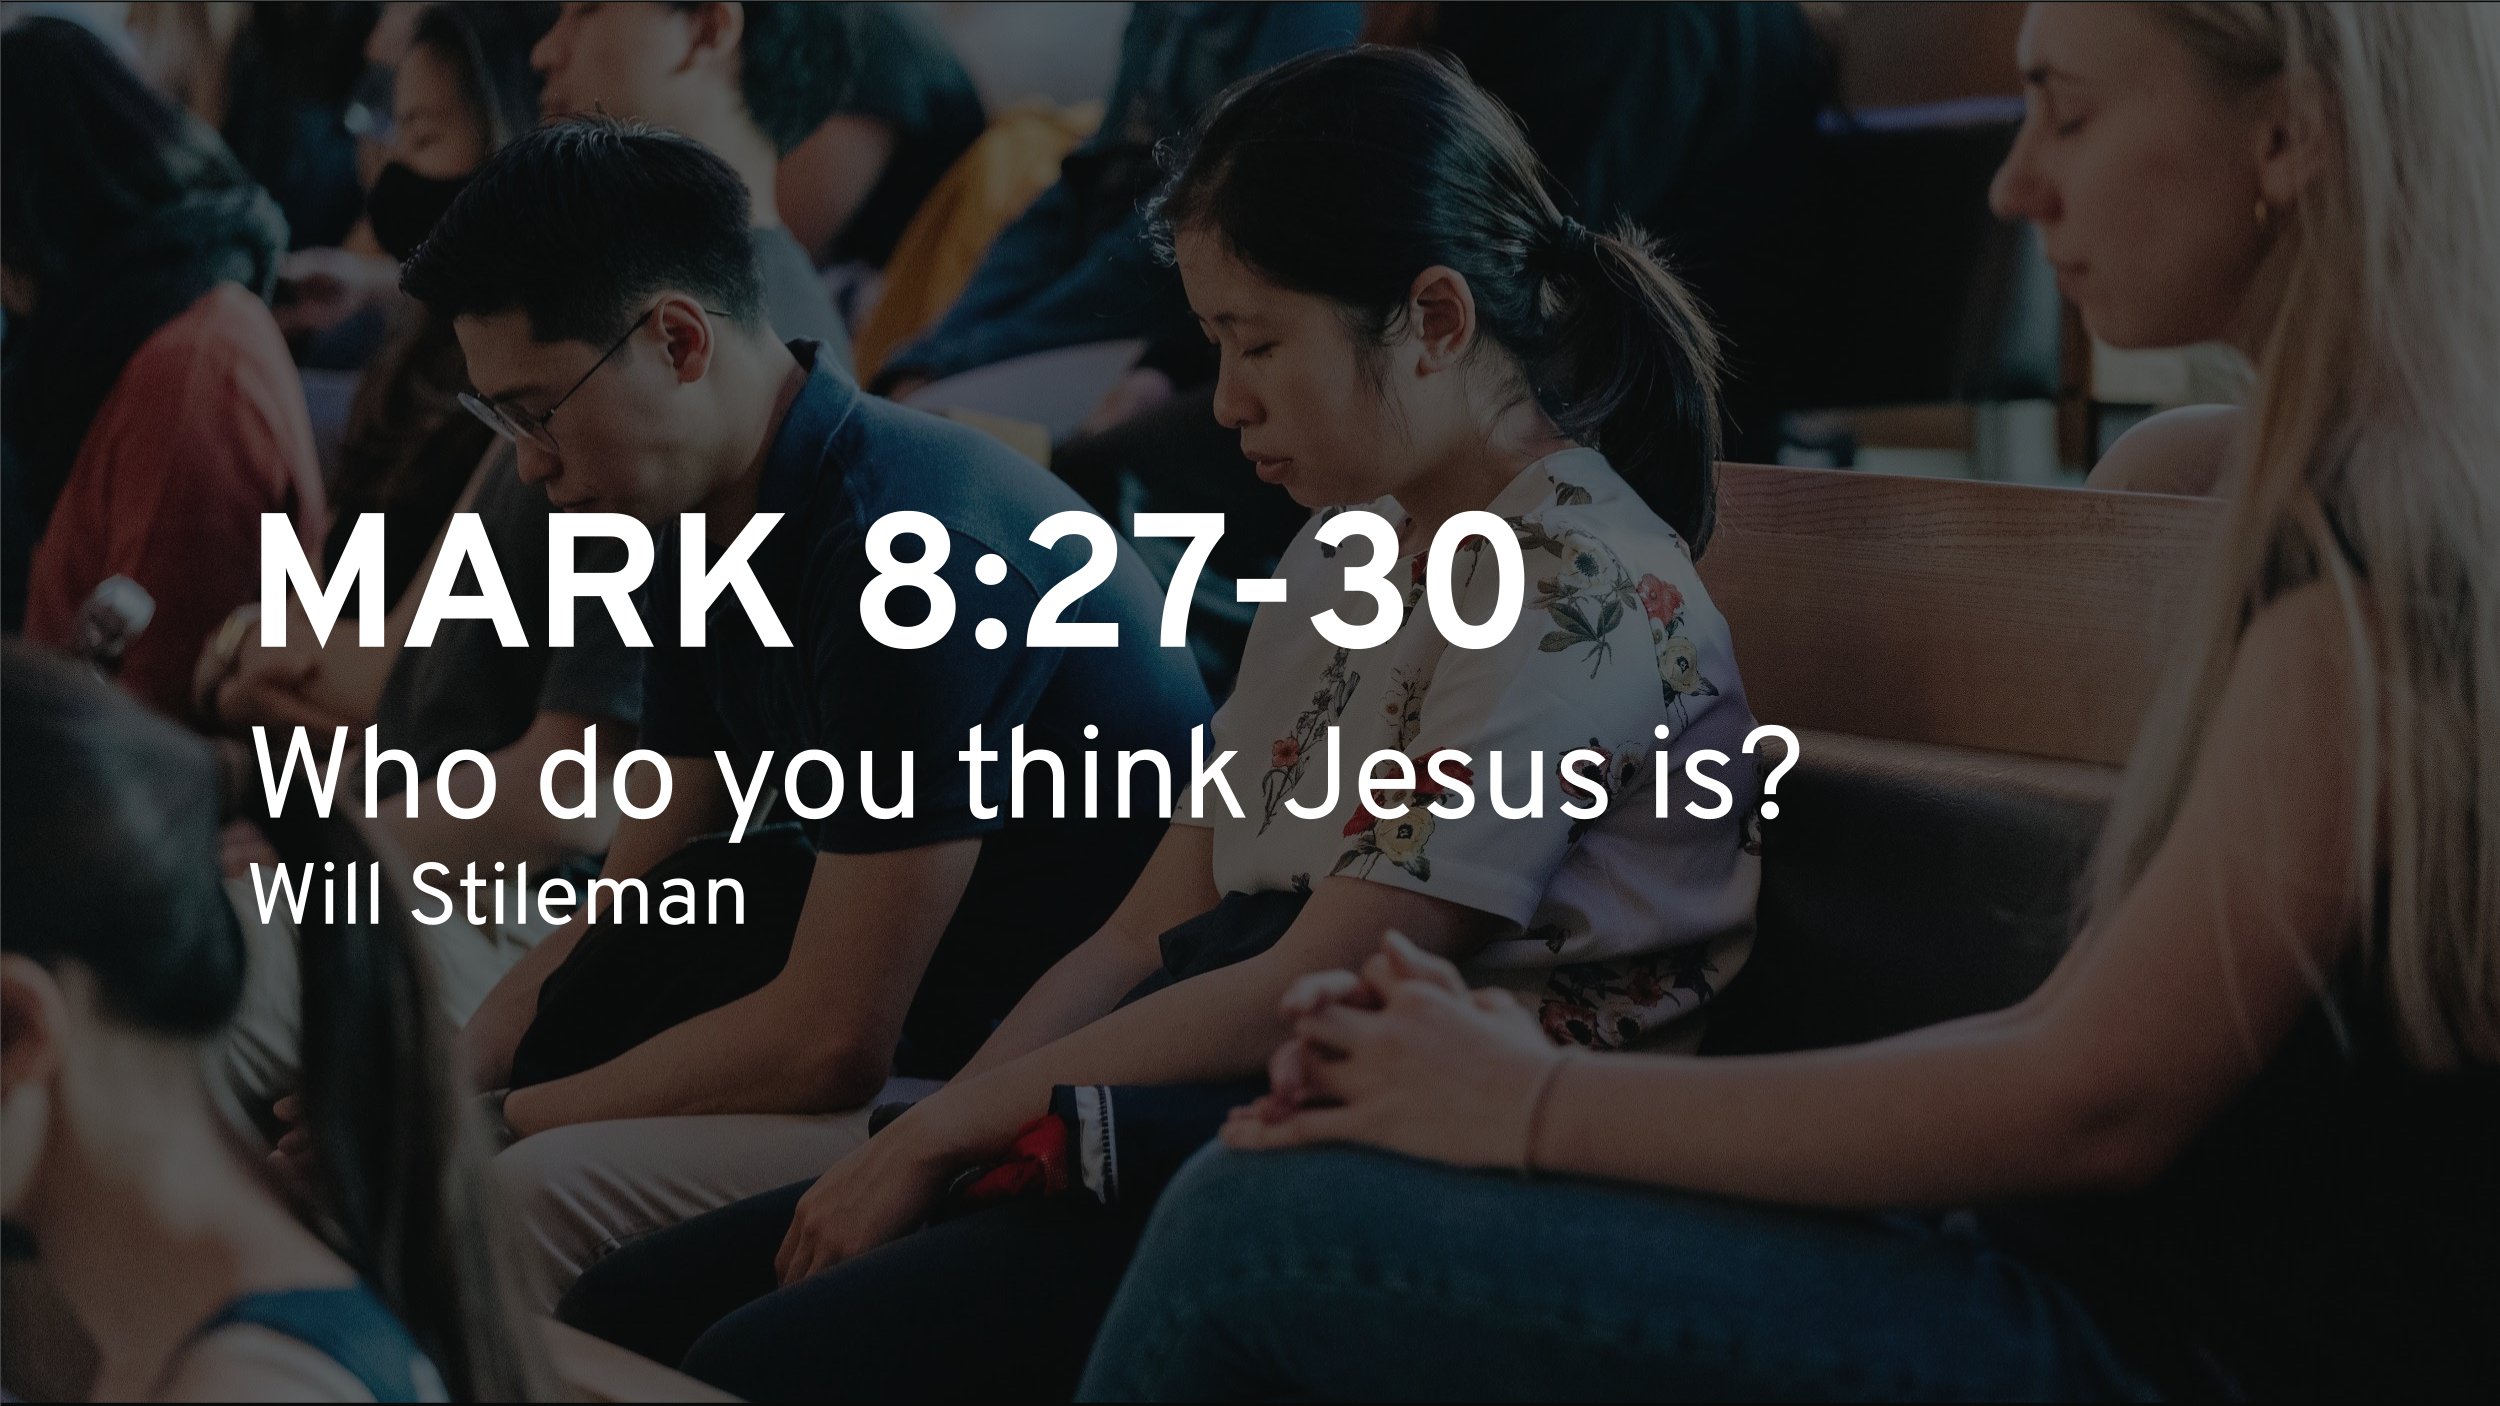 Who do you think Jesus is?